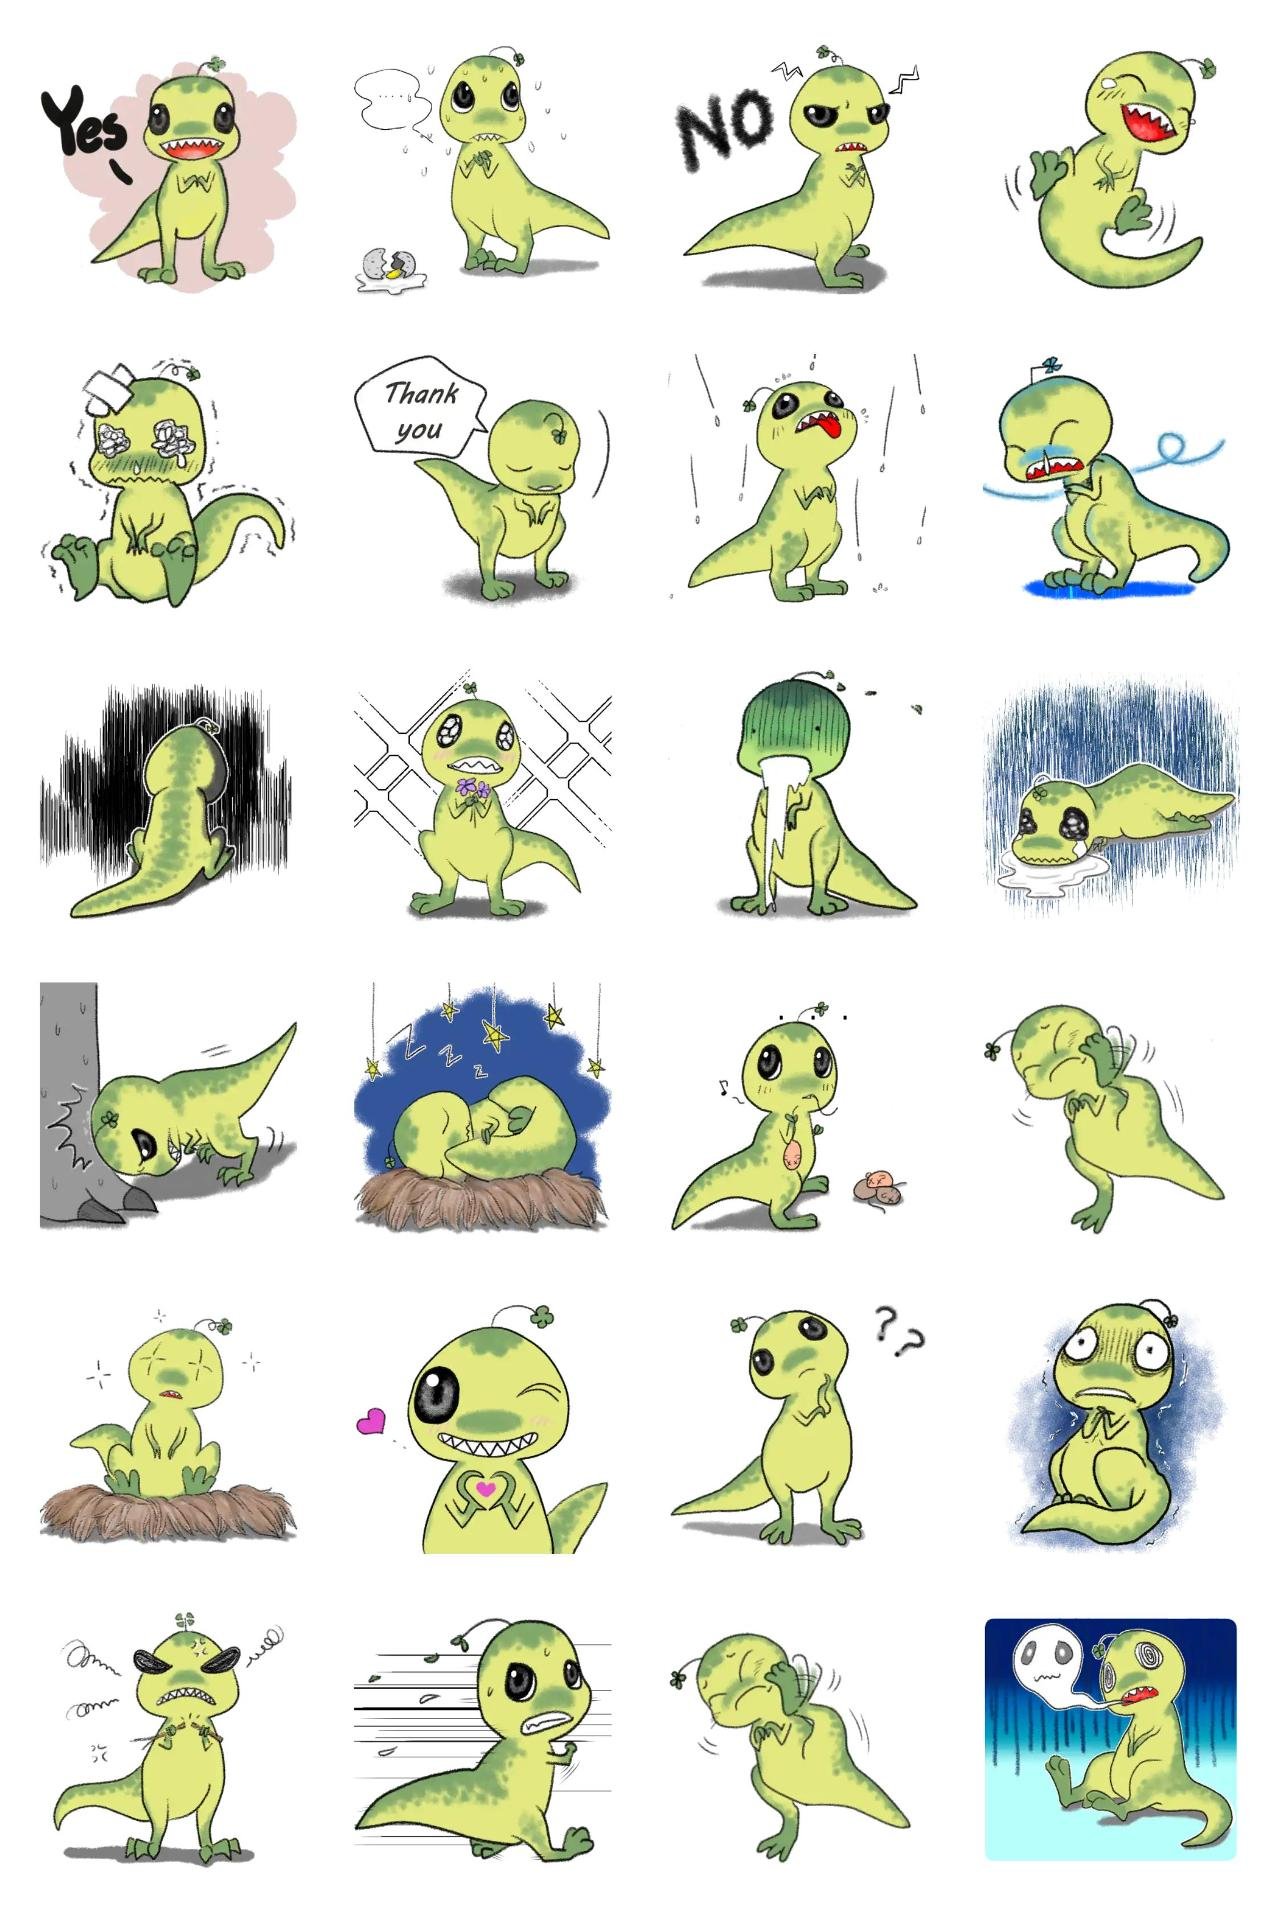 Tiramon Animation/Cartoon,Animals sticker pack for Whatsapp, Telegram, Signal, and others chatting and message apps